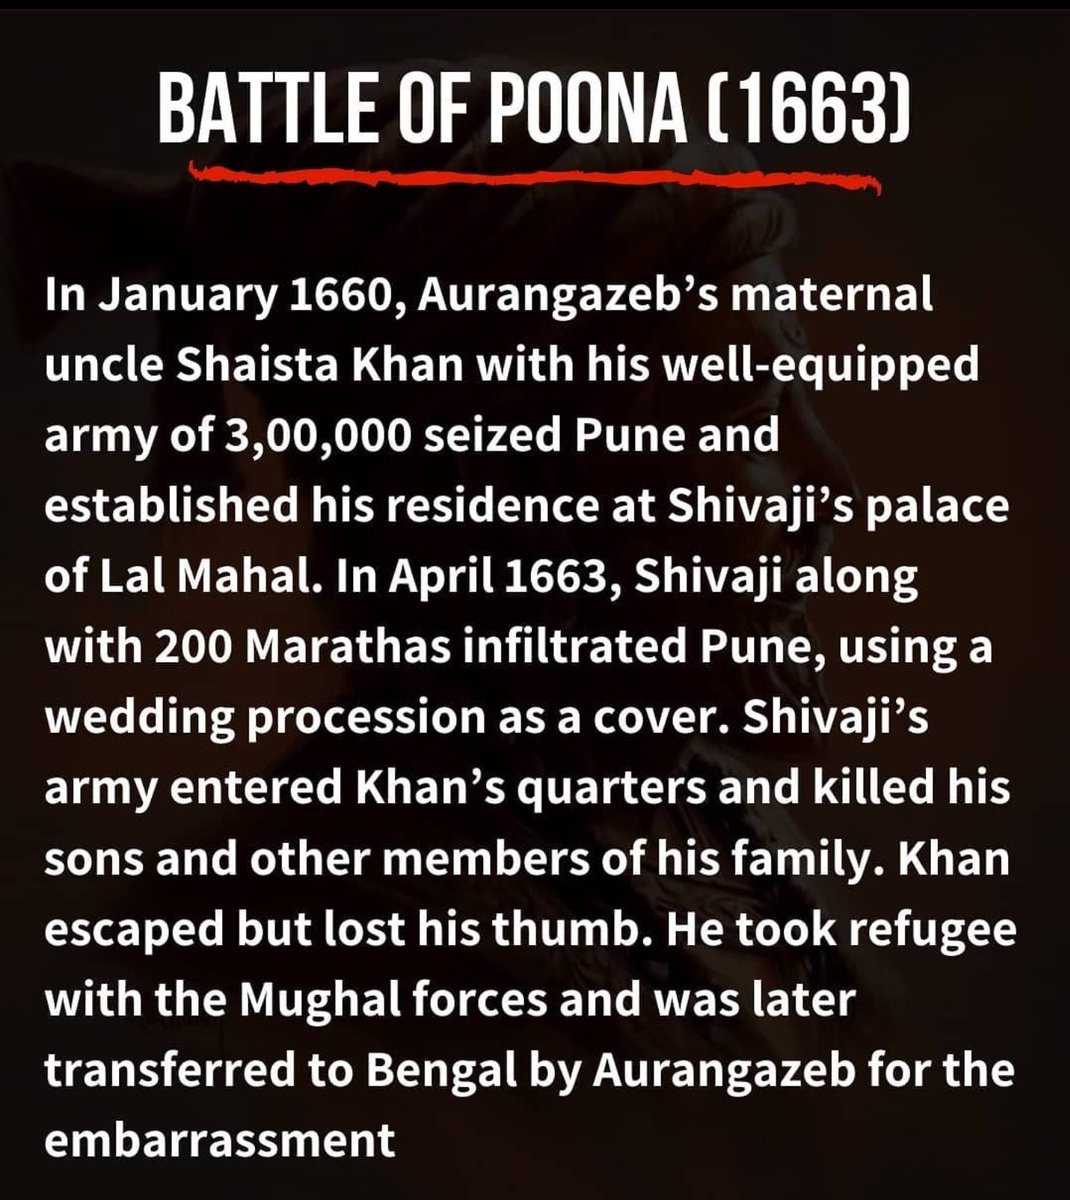 Greatest Battles of  #Chatrapatishivajimaharaj ji. Every Indian should know about this.